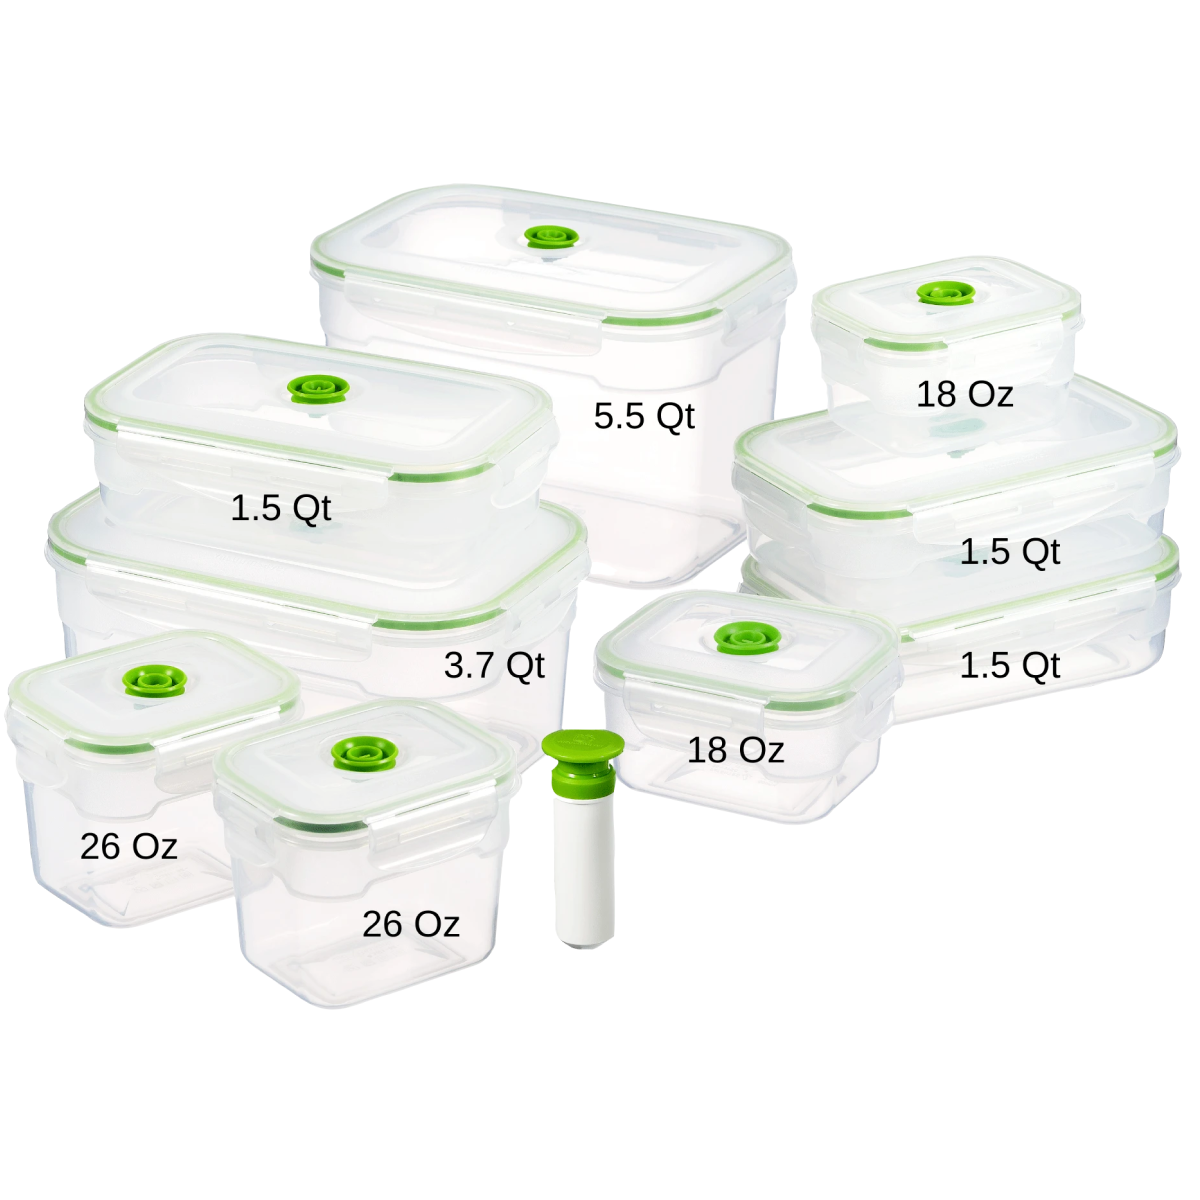 FoodSaver Vacuum Container Storage Box Size 1.8 Liters Clear Green